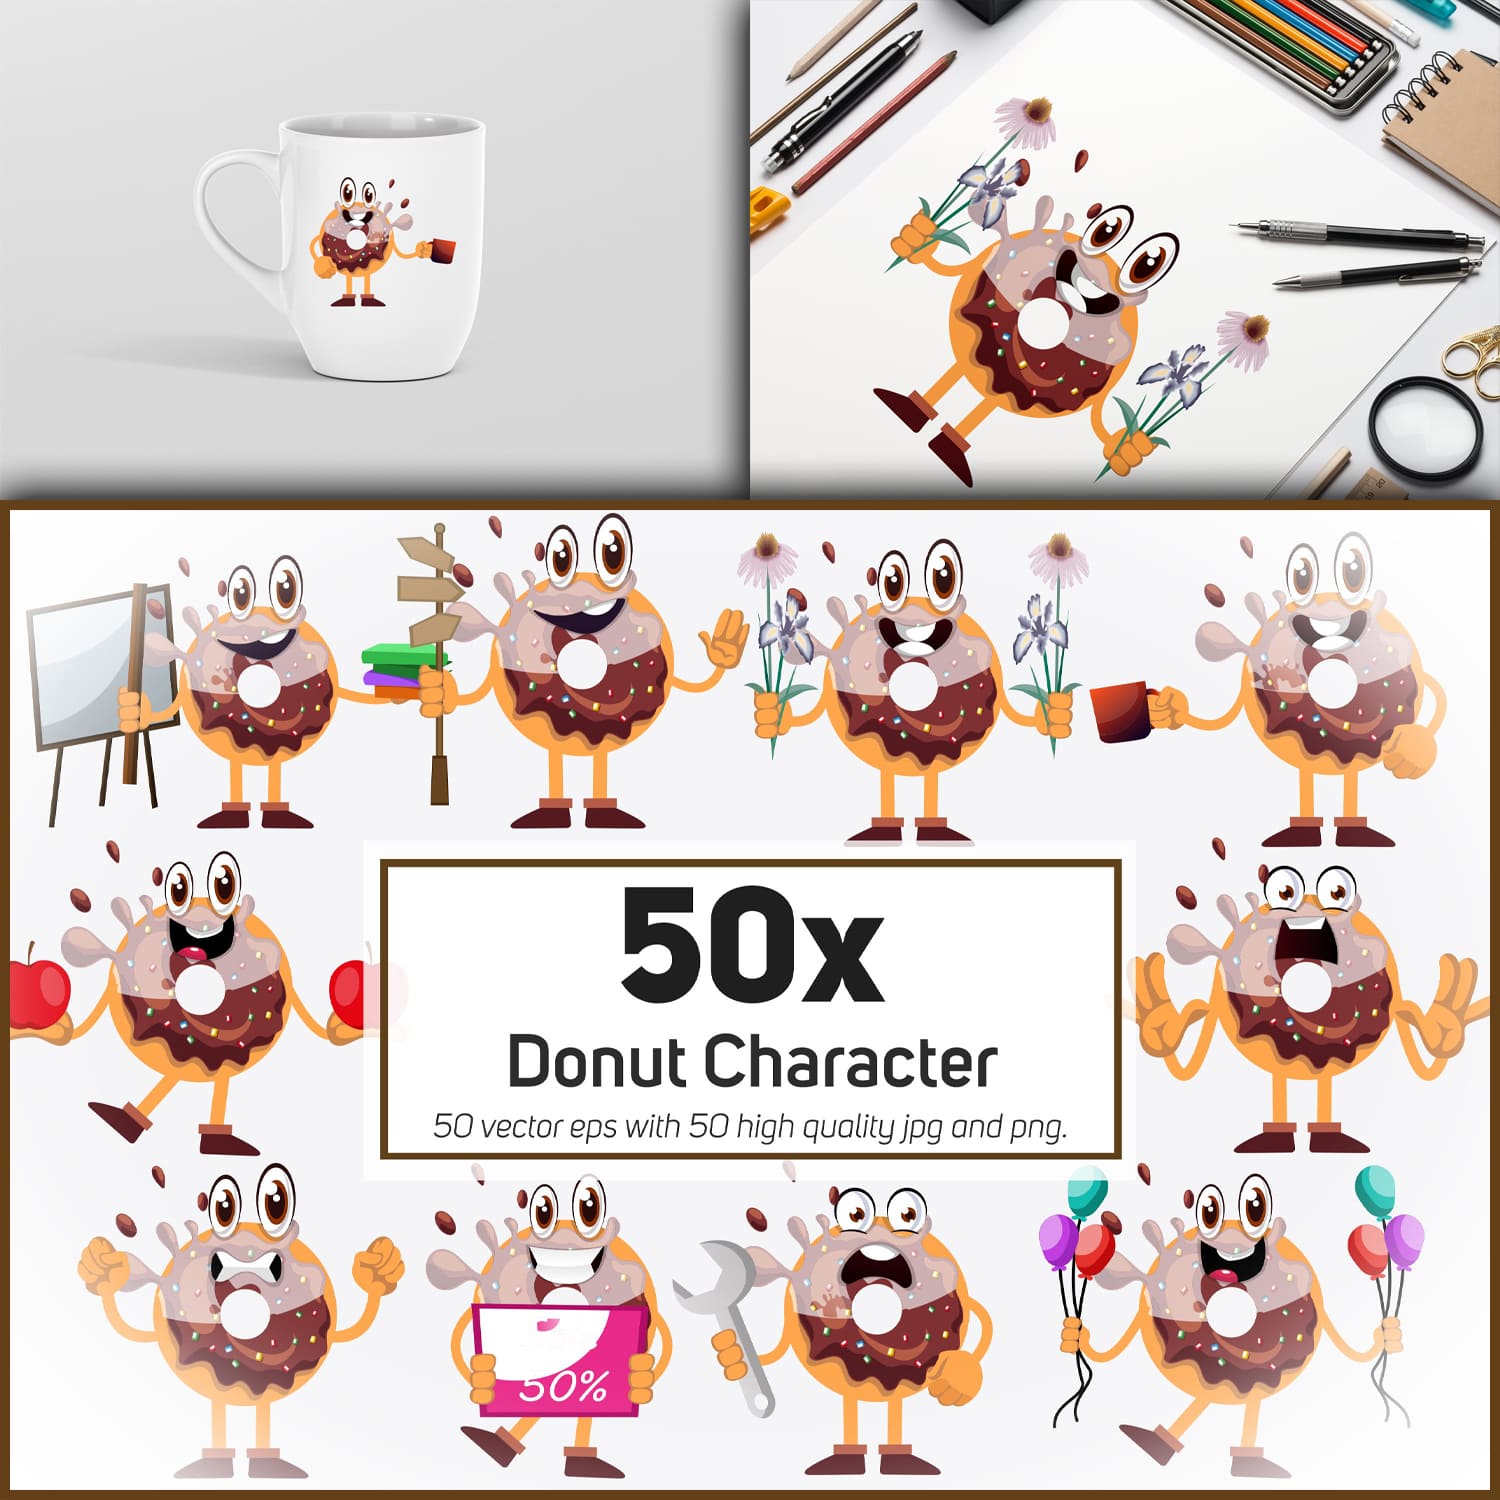 50x Donut Character and Mascot Collection illustration. cover.